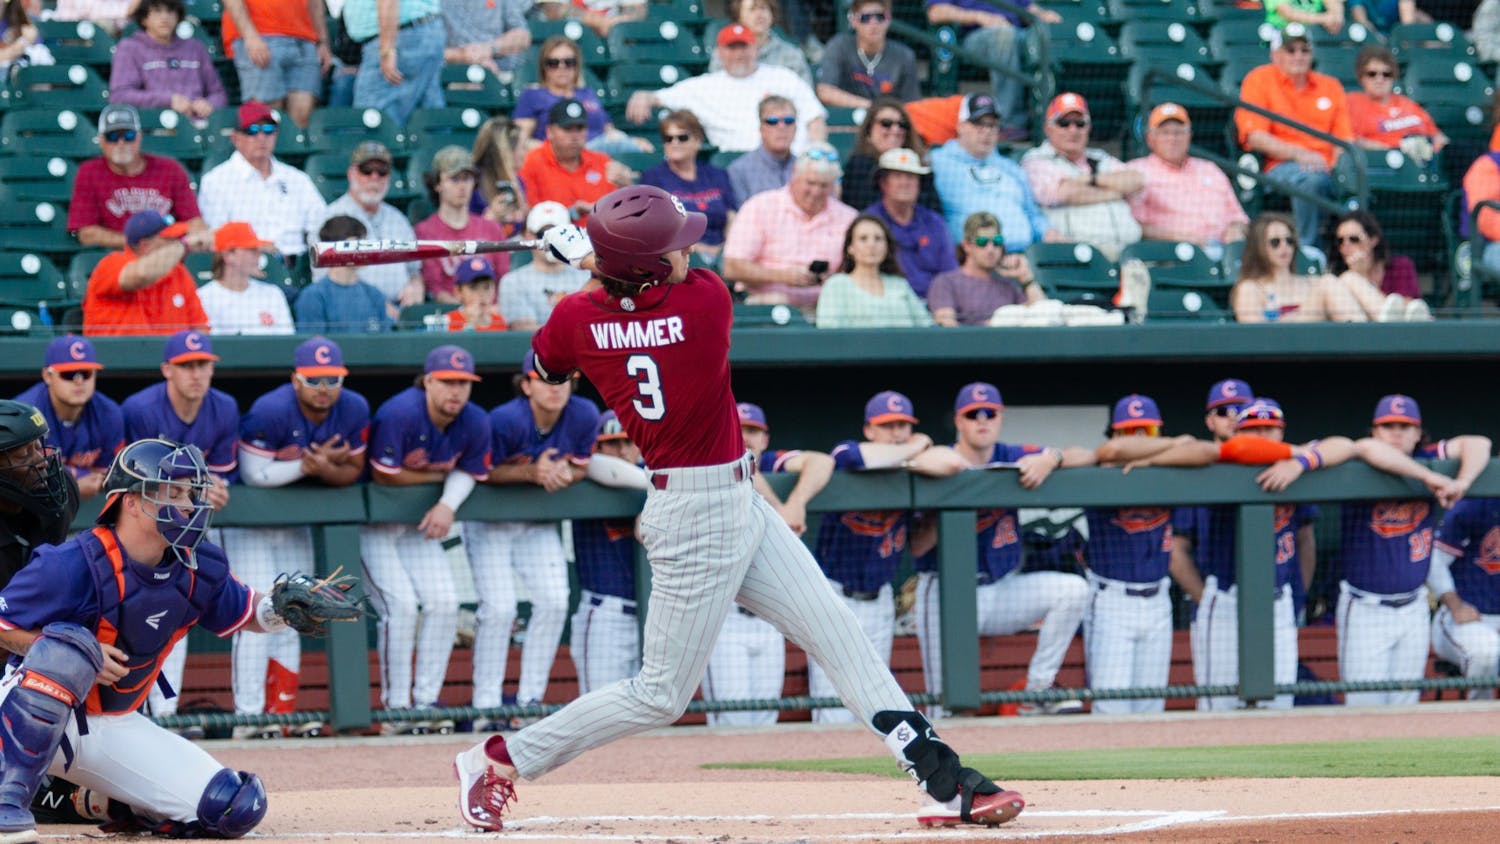 FILE—Senior infielder Braylen Wimmer bats in the first inning during a game on March 5, 2022. The Gamecocks fell 2-10 in the second game of the series against Clemson.&nbsp;